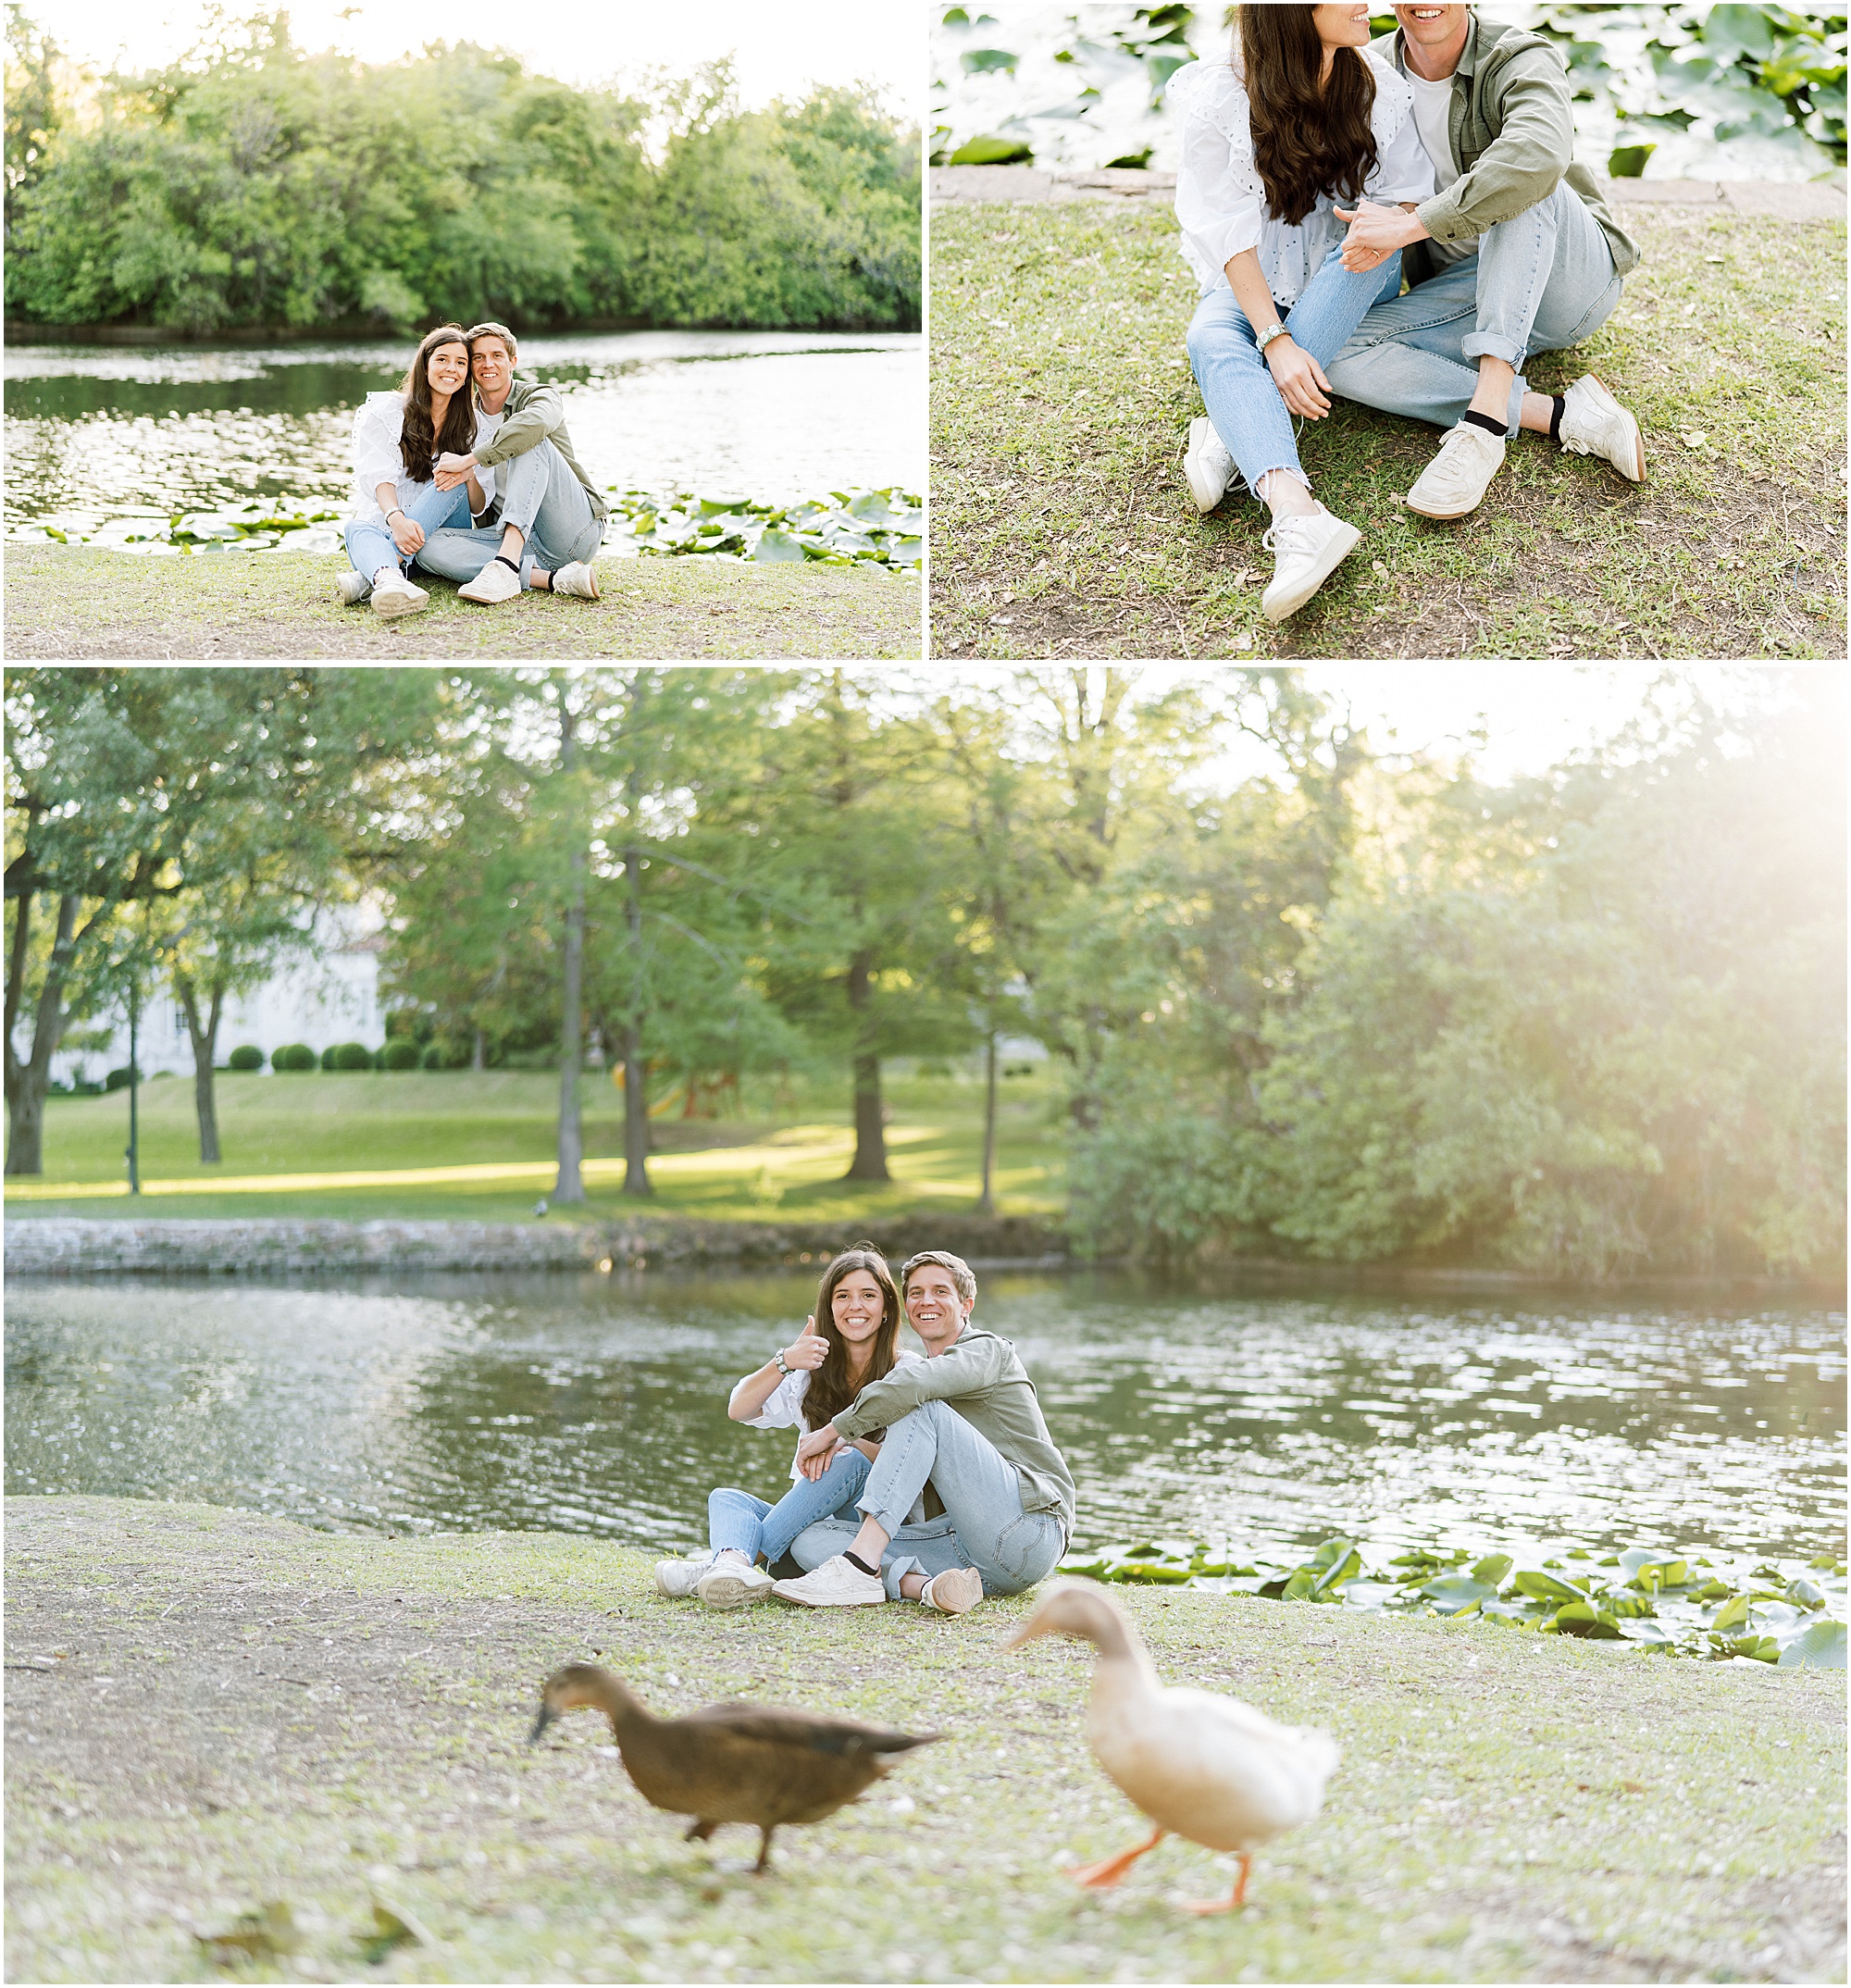 Engagement Session | Engagement Photos Dallas, Texas | Texas Wedding Photographer | Bailee Starr Photography 